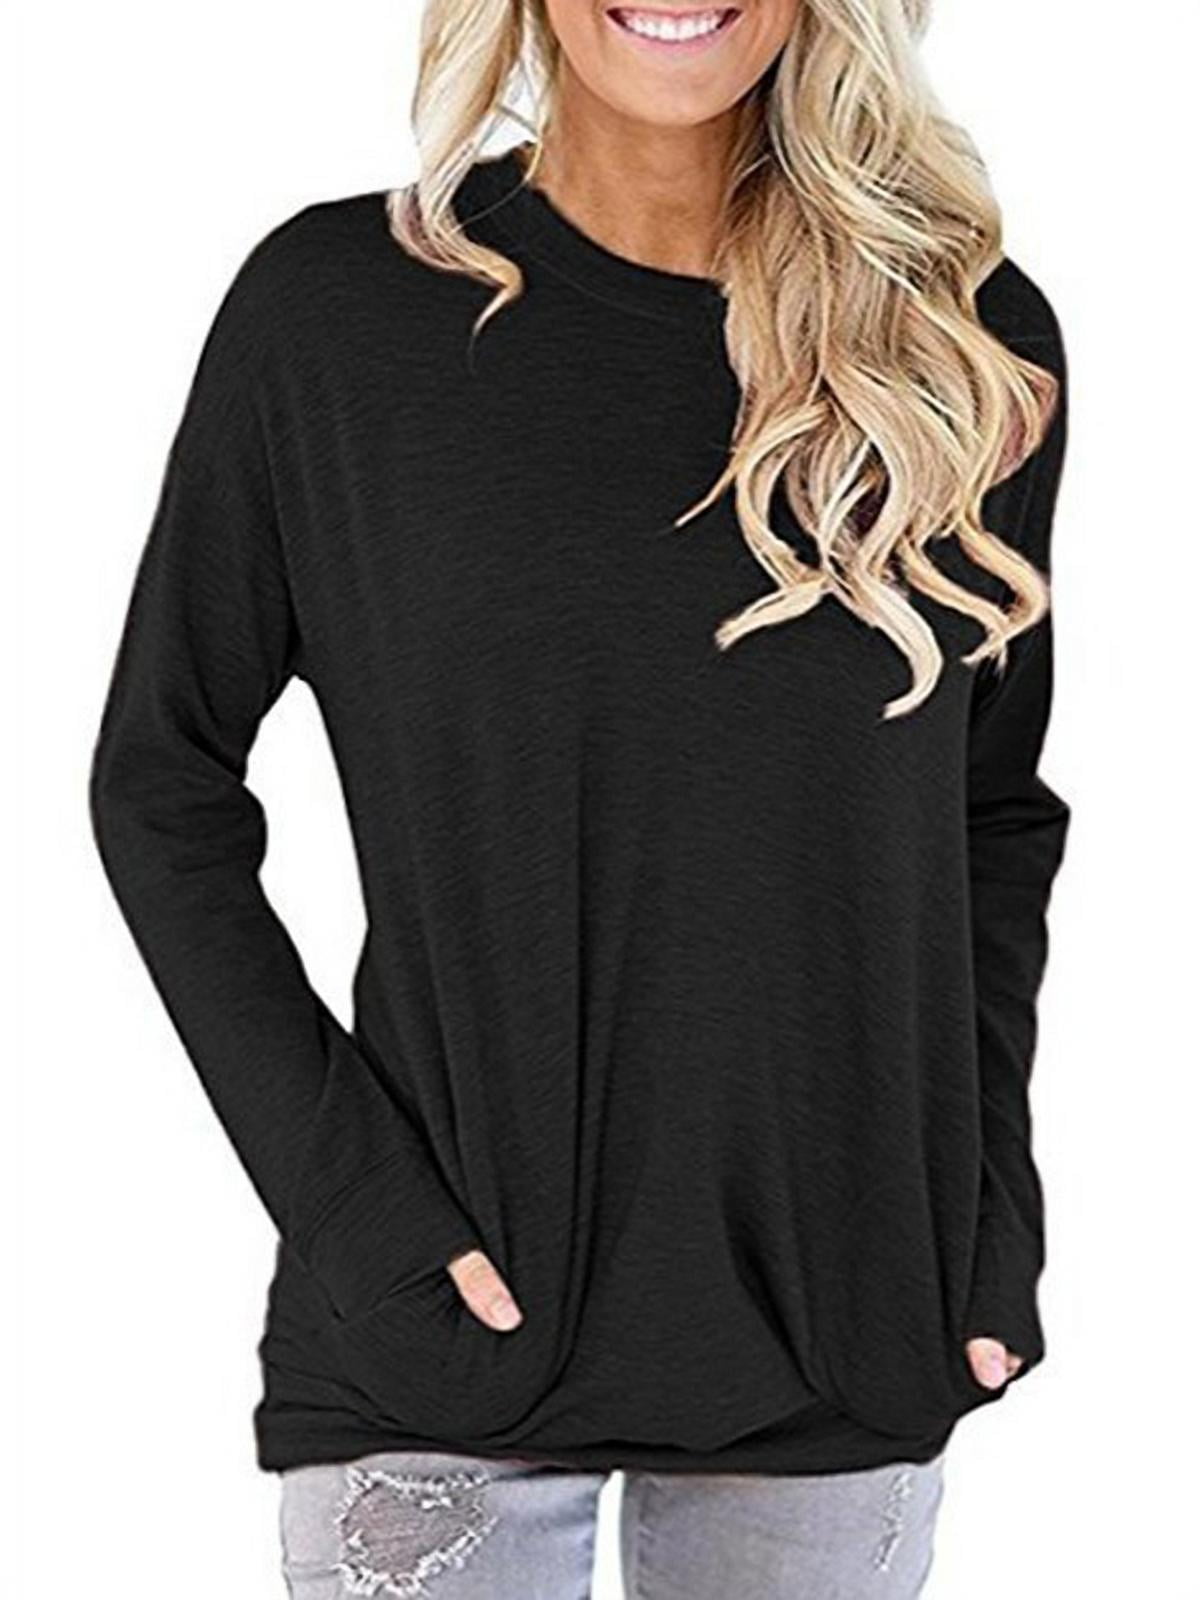 DESKABLY Overstock Items Clearance All Prime Sweatshirt for Women V Neck  Button Down Casual Long Sleeve Shirts for Women at  Women's Clothing  store